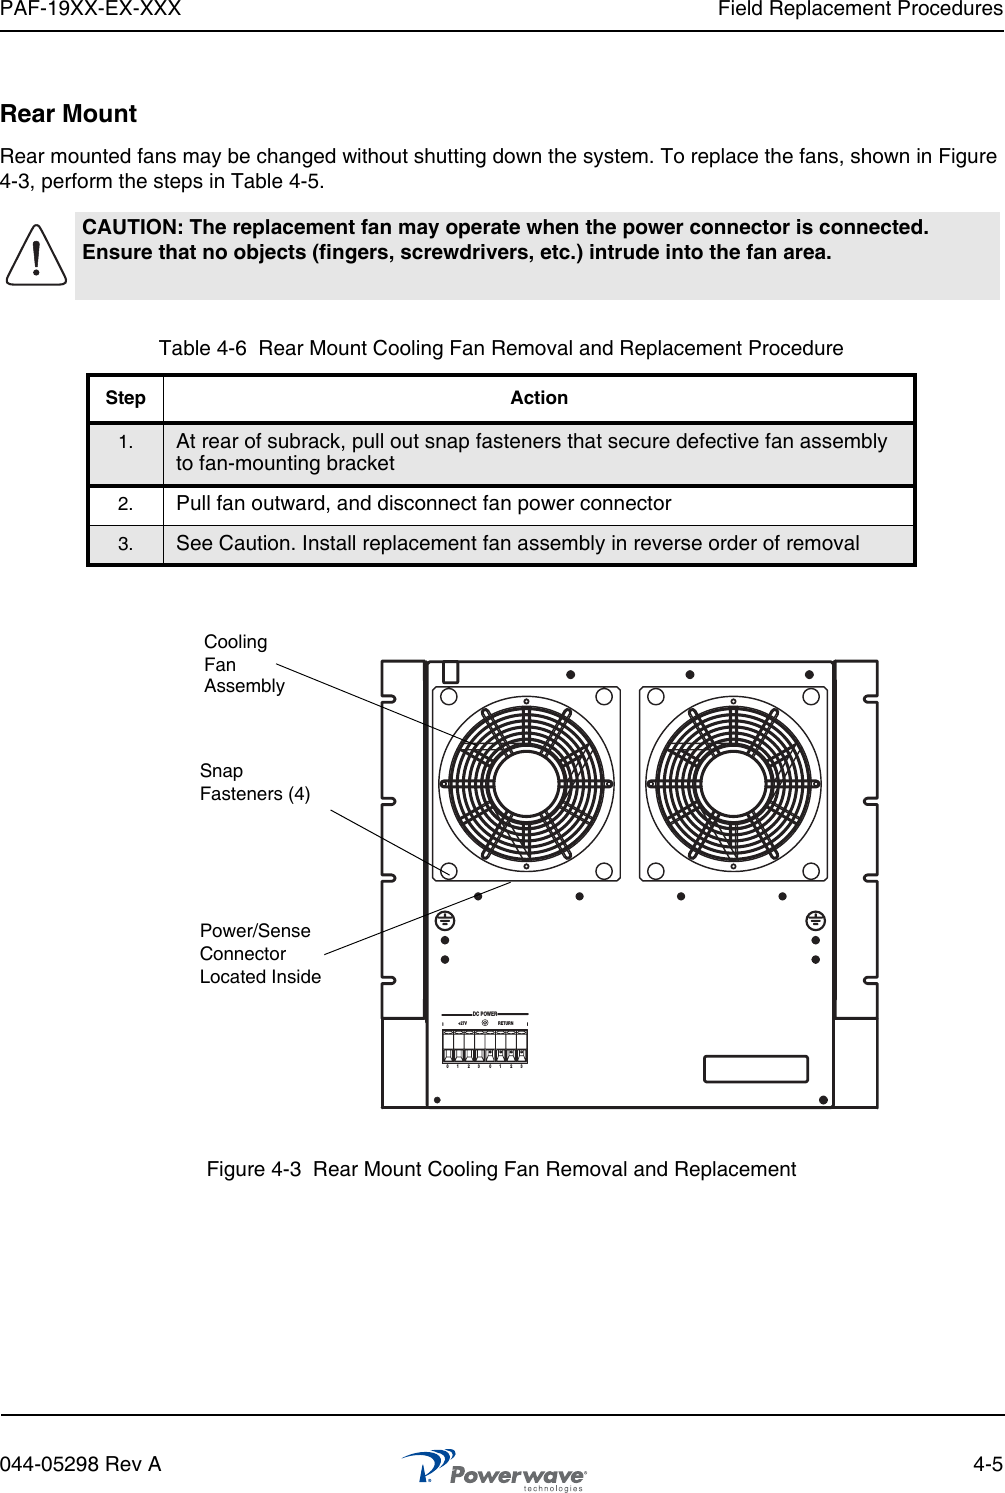 PAF-19XX-EX-XXX Field Replacement Procedures044-05298 Rev A 4-5Rear MountRear mounted fans may be changed without shutting down the system. To replace the fans, shown in Figure 4-3, perform the steps in Table 4-5.  Figure 4-3  Rear Mount Cooling Fan Removal and ReplacementCAUTION: The replacement fan may operate when the power connector is connected. Ensure that no objects (fingers, screwdrivers, etc.) intrude into the fan area.Table 4-6  Rear Mount Cooling Fan Removal and Replacement ProcedureStep Action1. At rear of subrack, pull out snap fasteners that secure defective fan assembly to fan-mounting bracket2. Pull fan outward, and disconnect fan power connector3. See Caution. Install replacement fan assembly in reverse order of removalDC POWER+27V RETURN0        1 2        3 0        1 2        3CoolingFanSnapFasteners (4)Power/Sense ConnectorLocated InsideAssembly